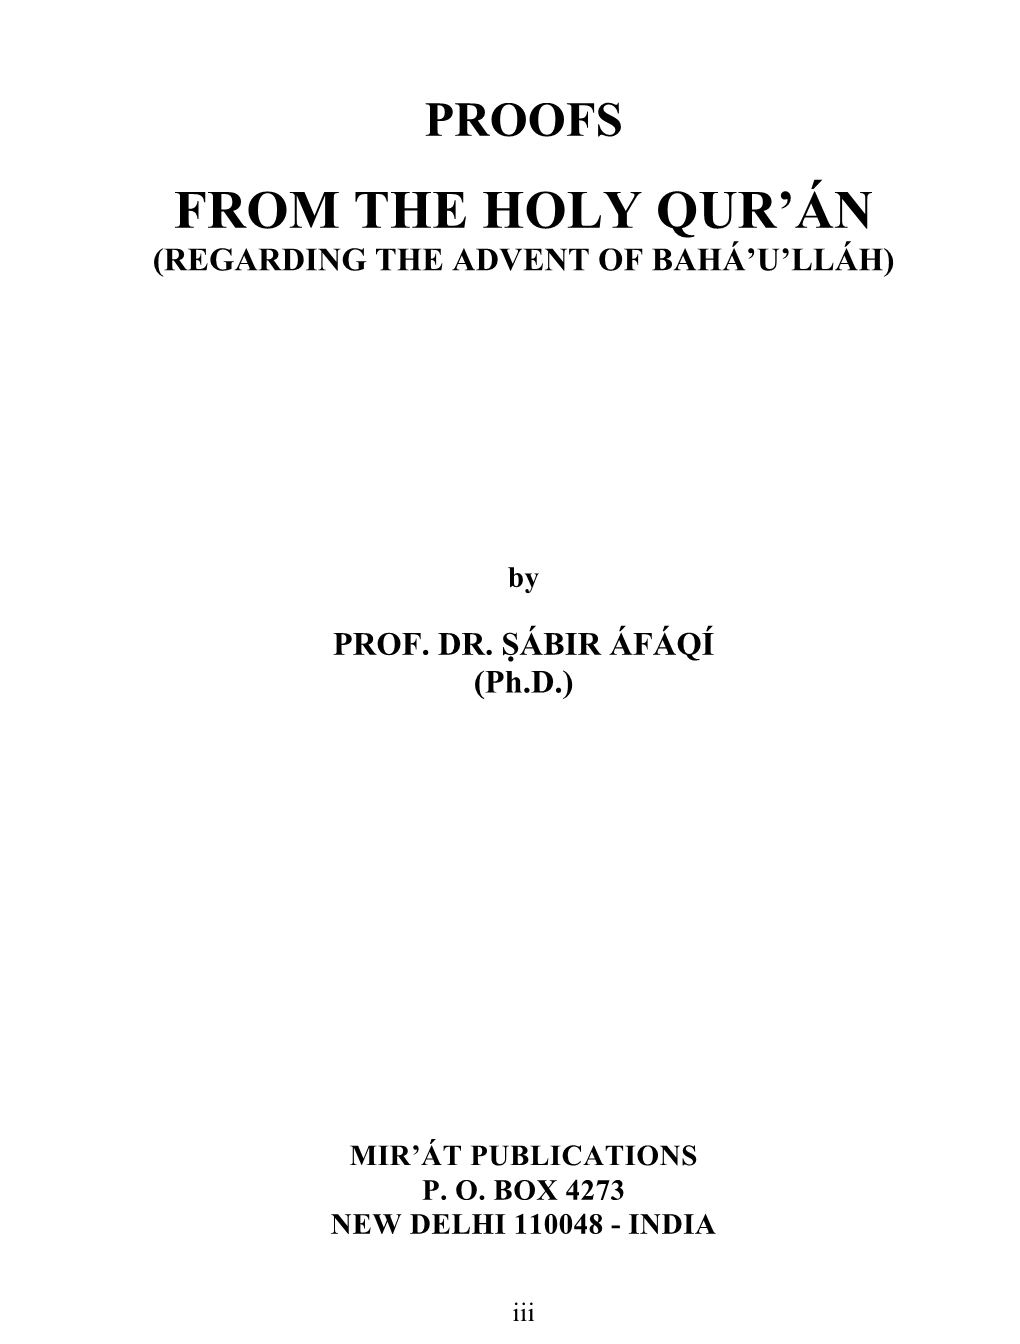 From the Holy Qur'án